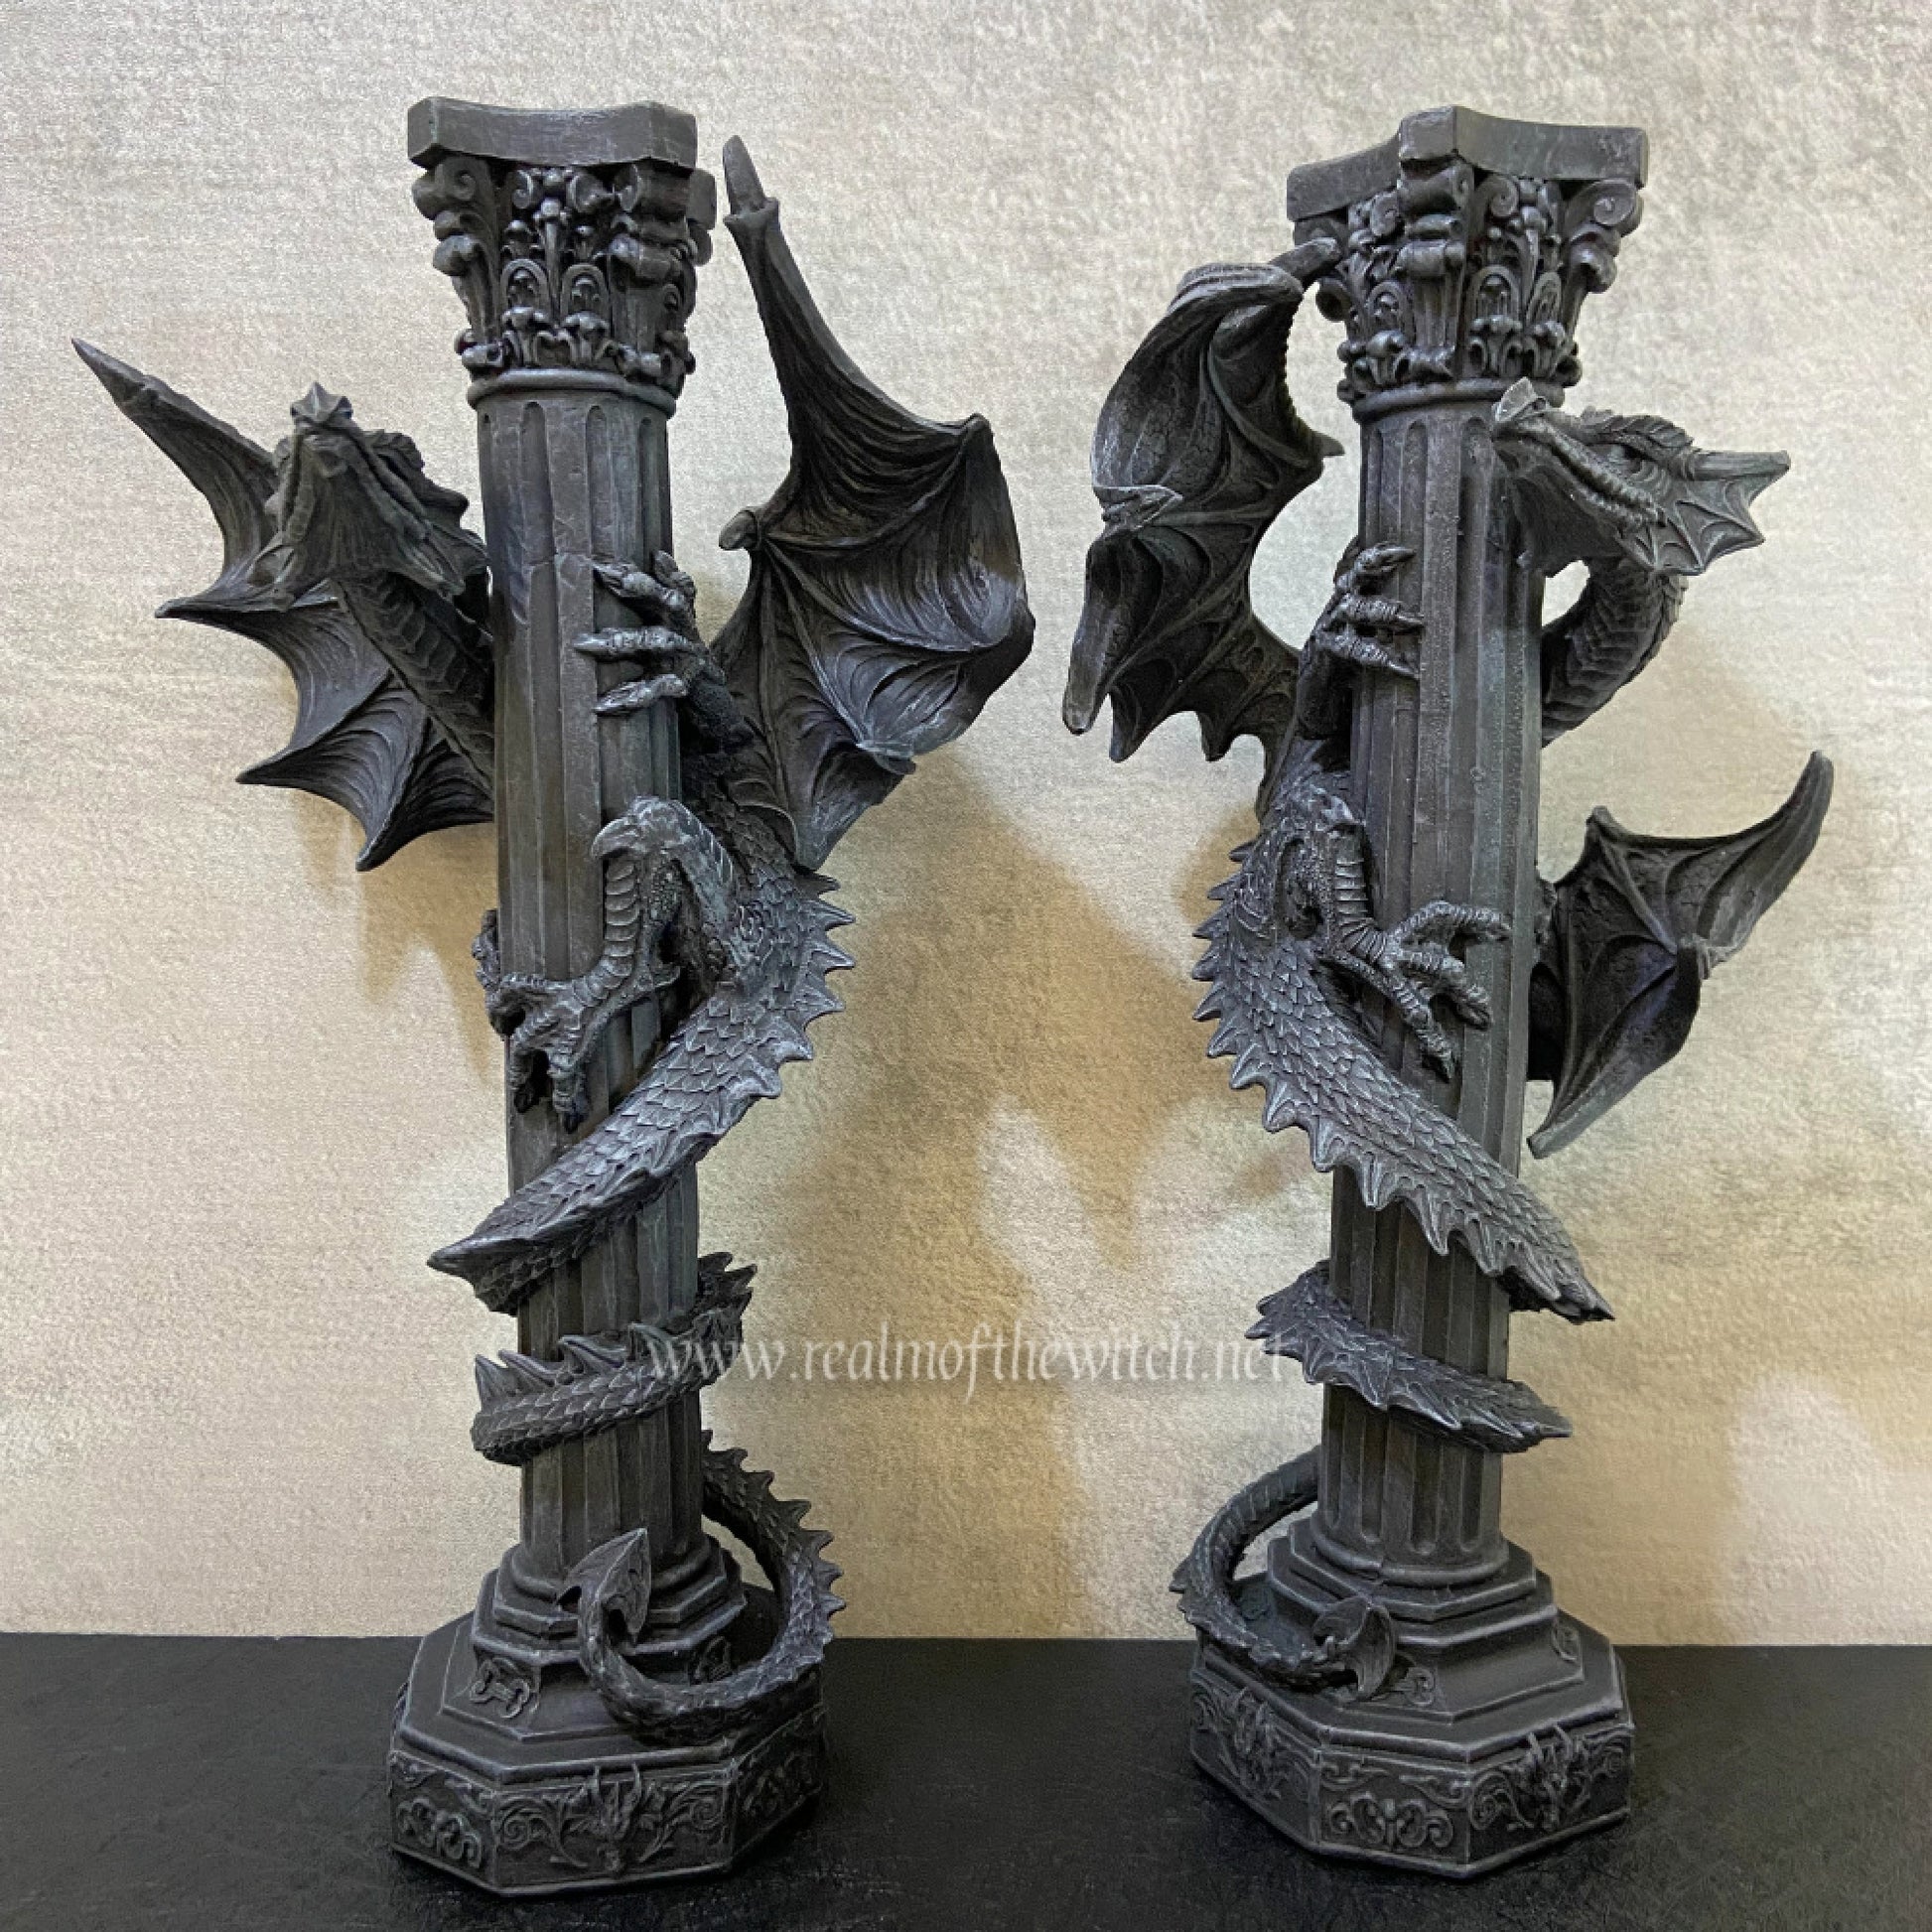 Ideal for the home of a fan of mythical creatures, this set of 2 candle holders expertly crafted from resin and hand painted offers a unique accent.  The dragon figures, against a pair of baroque columns, twist their bodies around the posts with wings spread wide.  Add a touch of atmosphere to any living or dining area - these eye-catching holders bring a subtle light and charm. 28cm tall